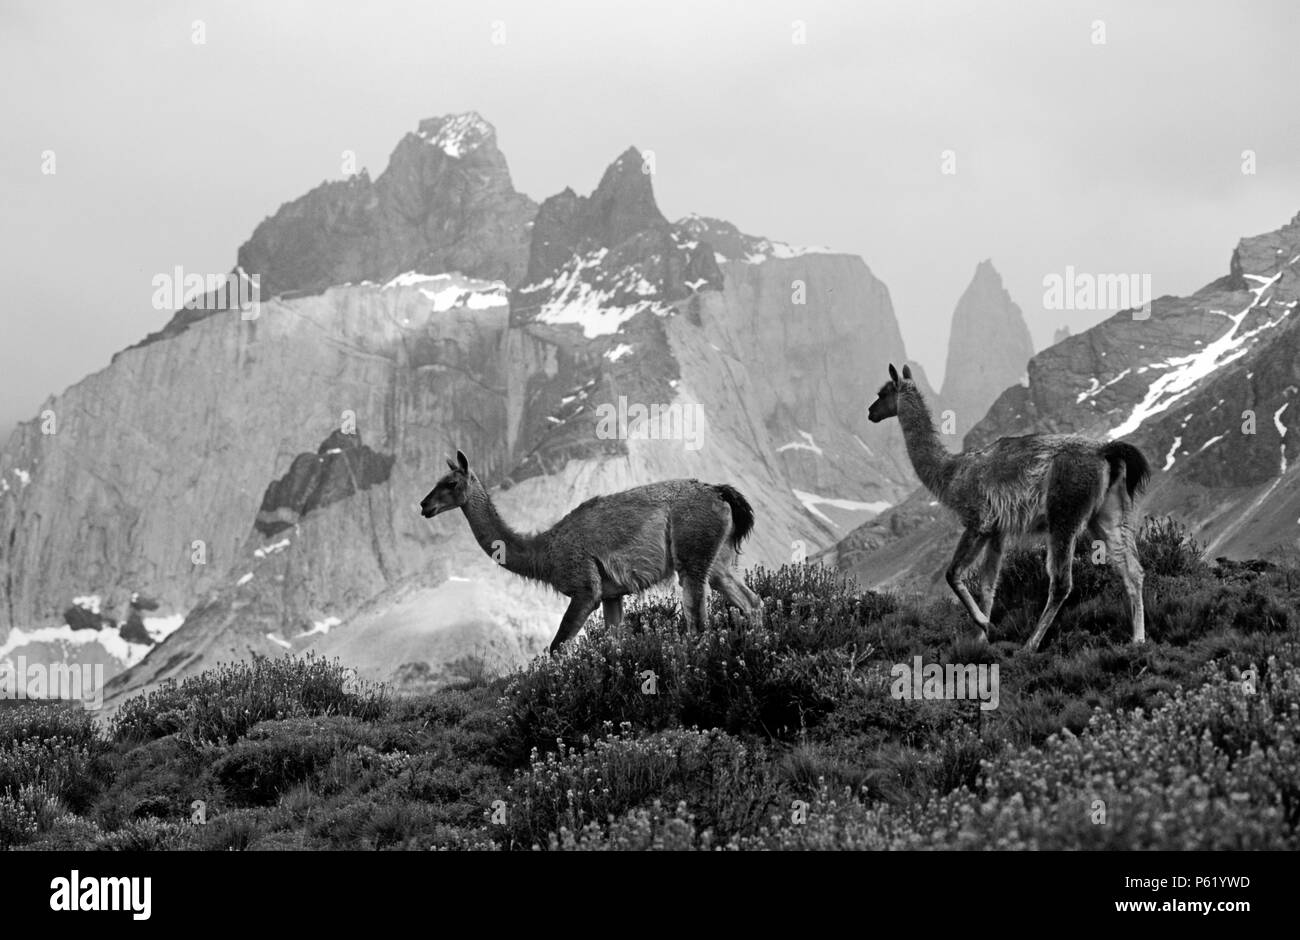 Herd of GUANACOS (Lama guanicoe) in TORRES DEL PAINE NATIONAL PARK with ANDES PEAK behind - PATAGONIA, CHILE Stock Photo